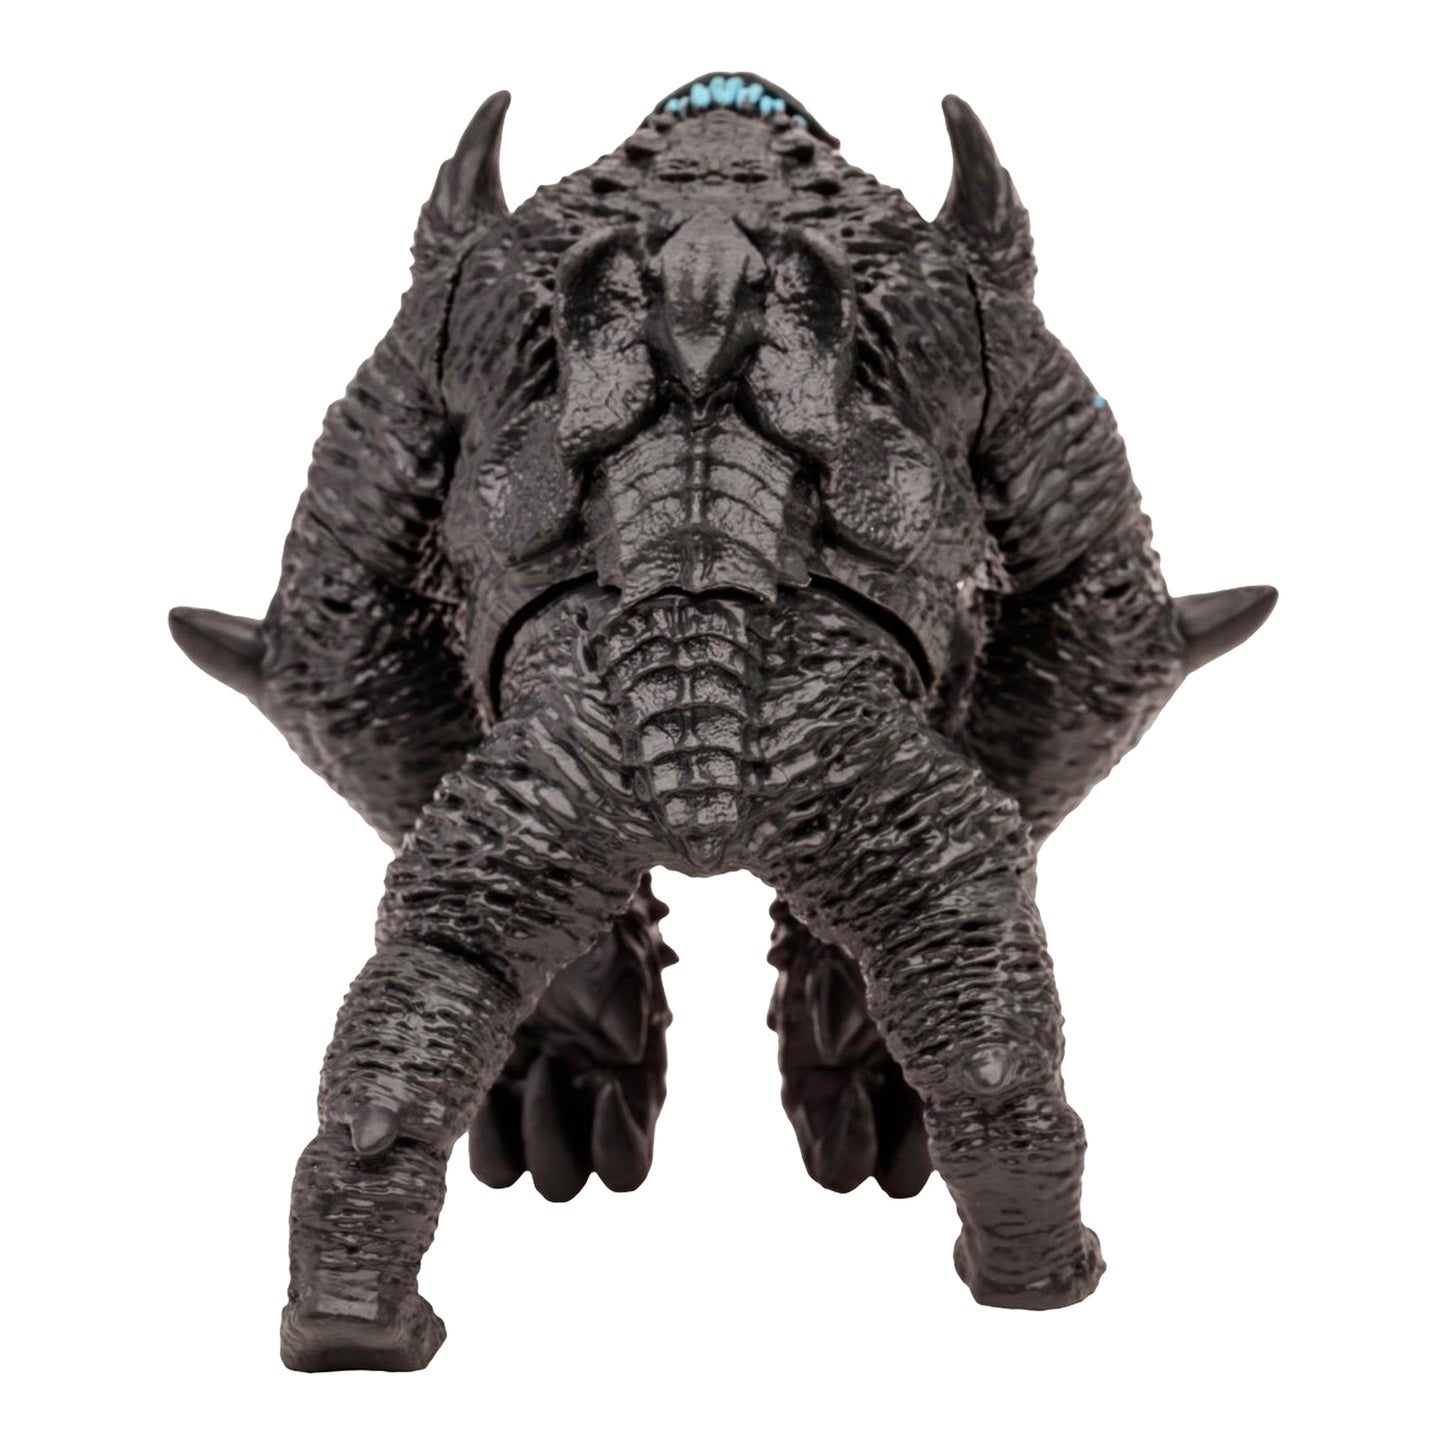 McFarlane Toys: Pacific Rim - Kaiju Wave 1 Leatherback 4" Tall Action Figure with Comic Book